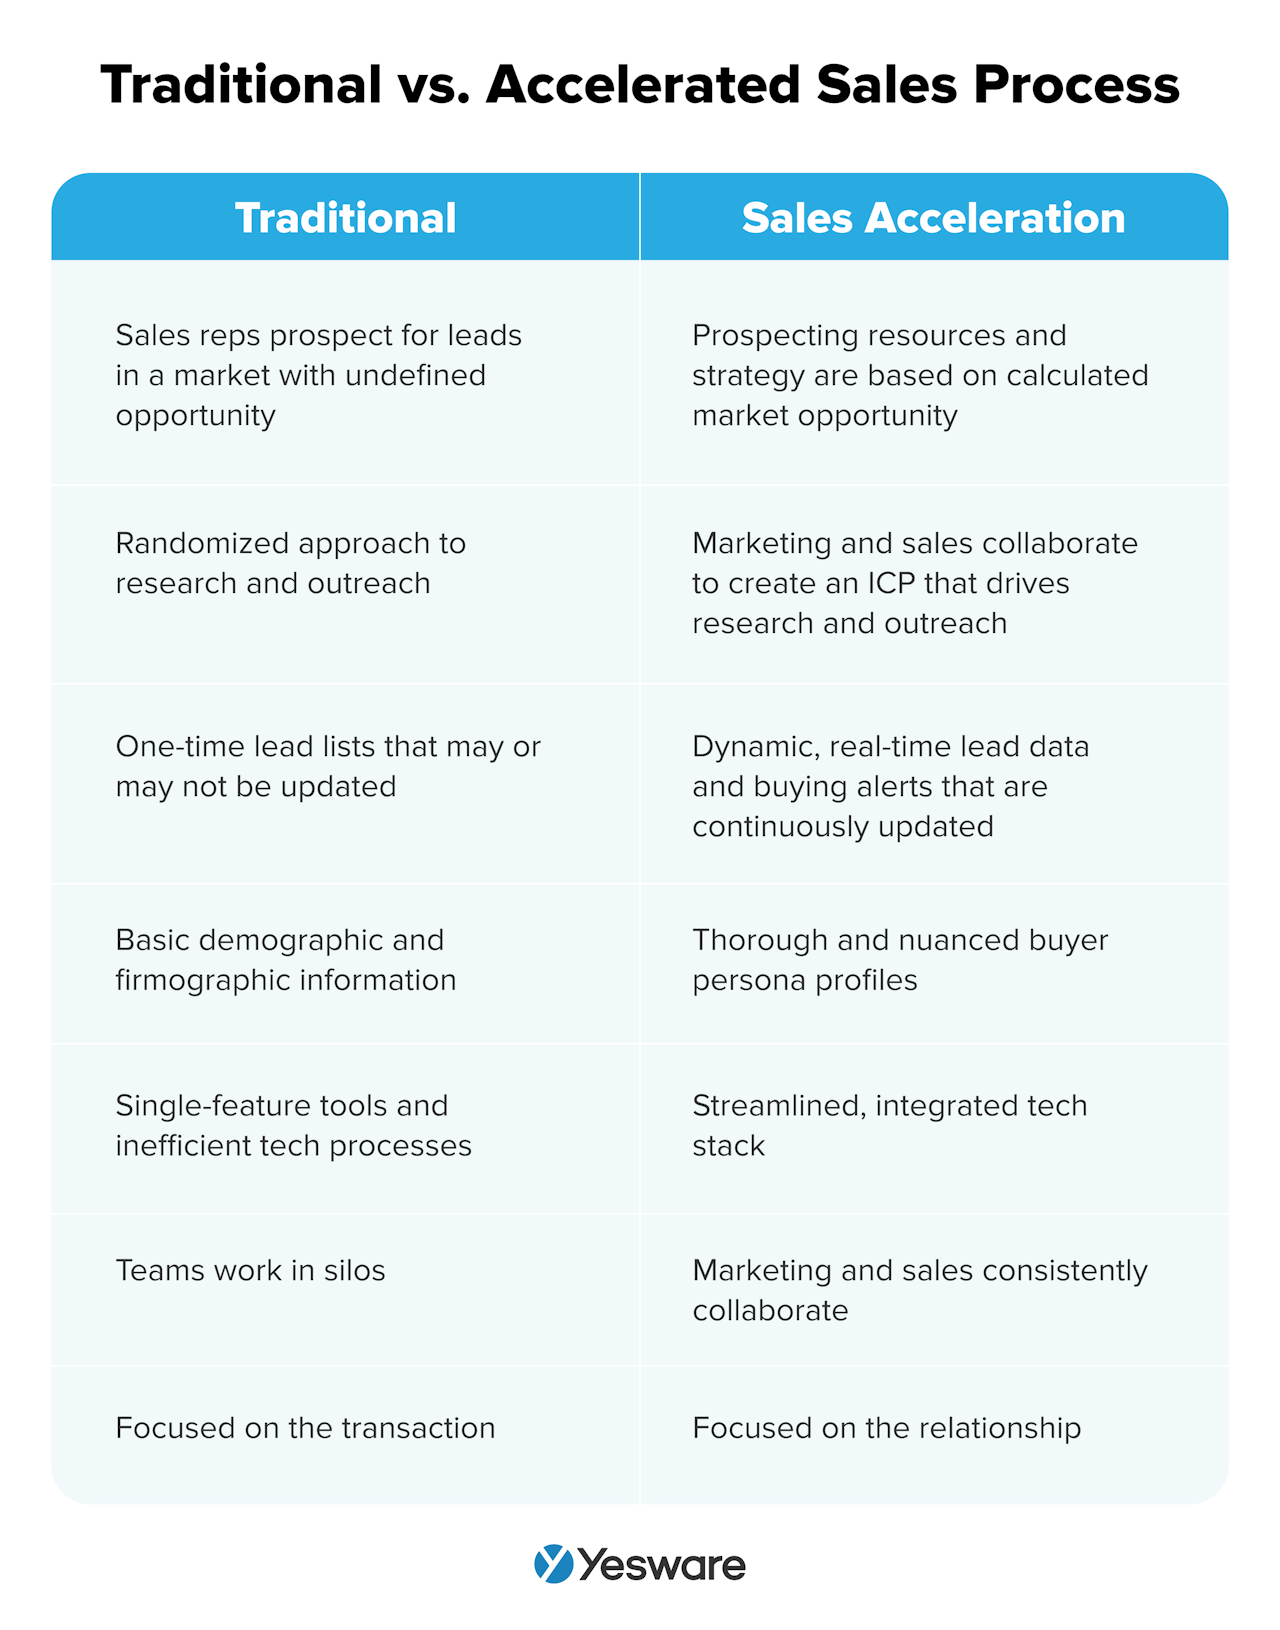 Traditional vs. accelerated sales process